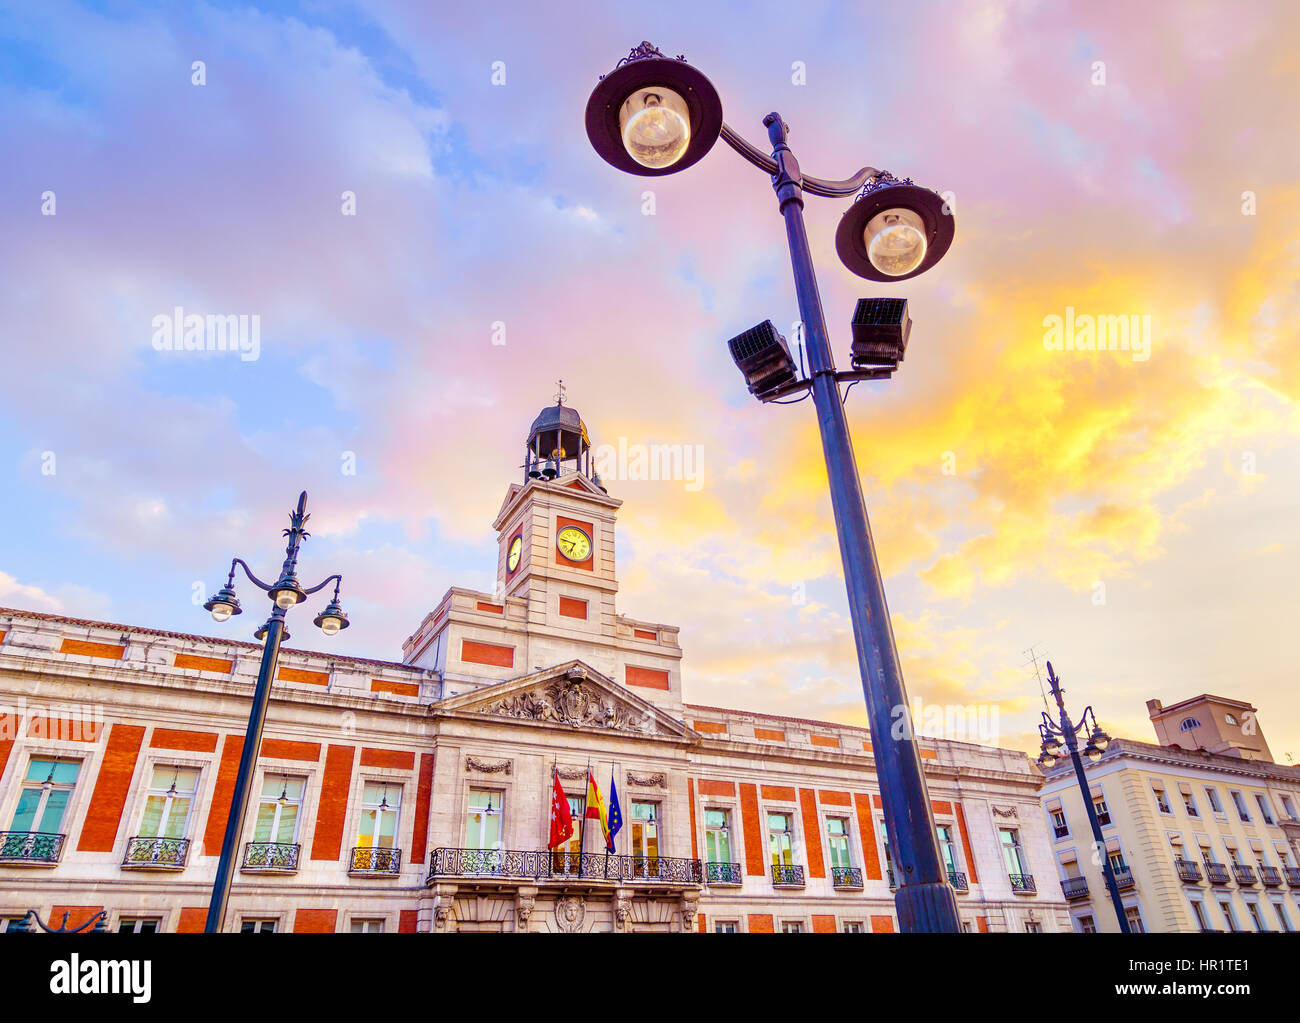 The Puerta del Sol square is the main public square in the city of Madrid, Spain. In the middle of the square is located the office of the President o Stock Photo